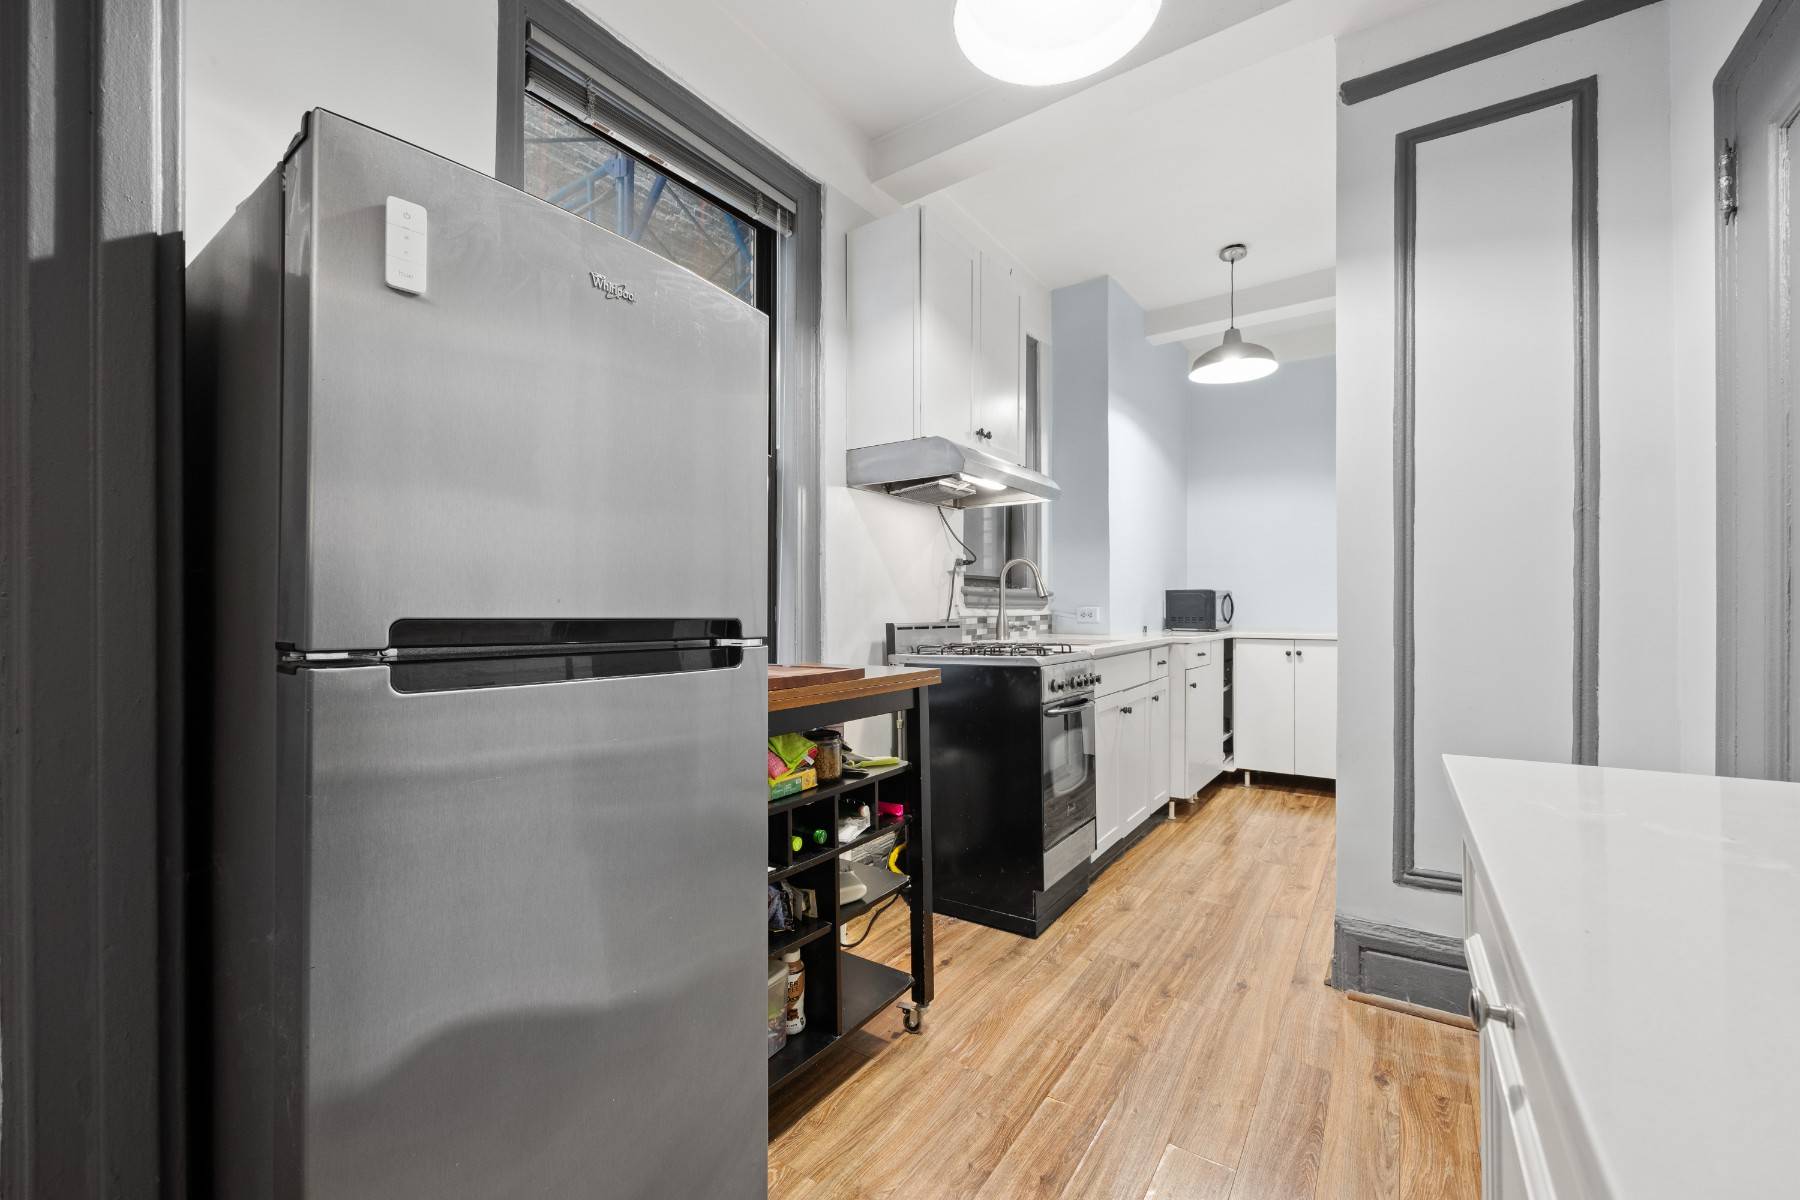 Introducing a charming 1 bedroom, 1 bathroom co op nestled in the heart of the vibrant Upper West Side.